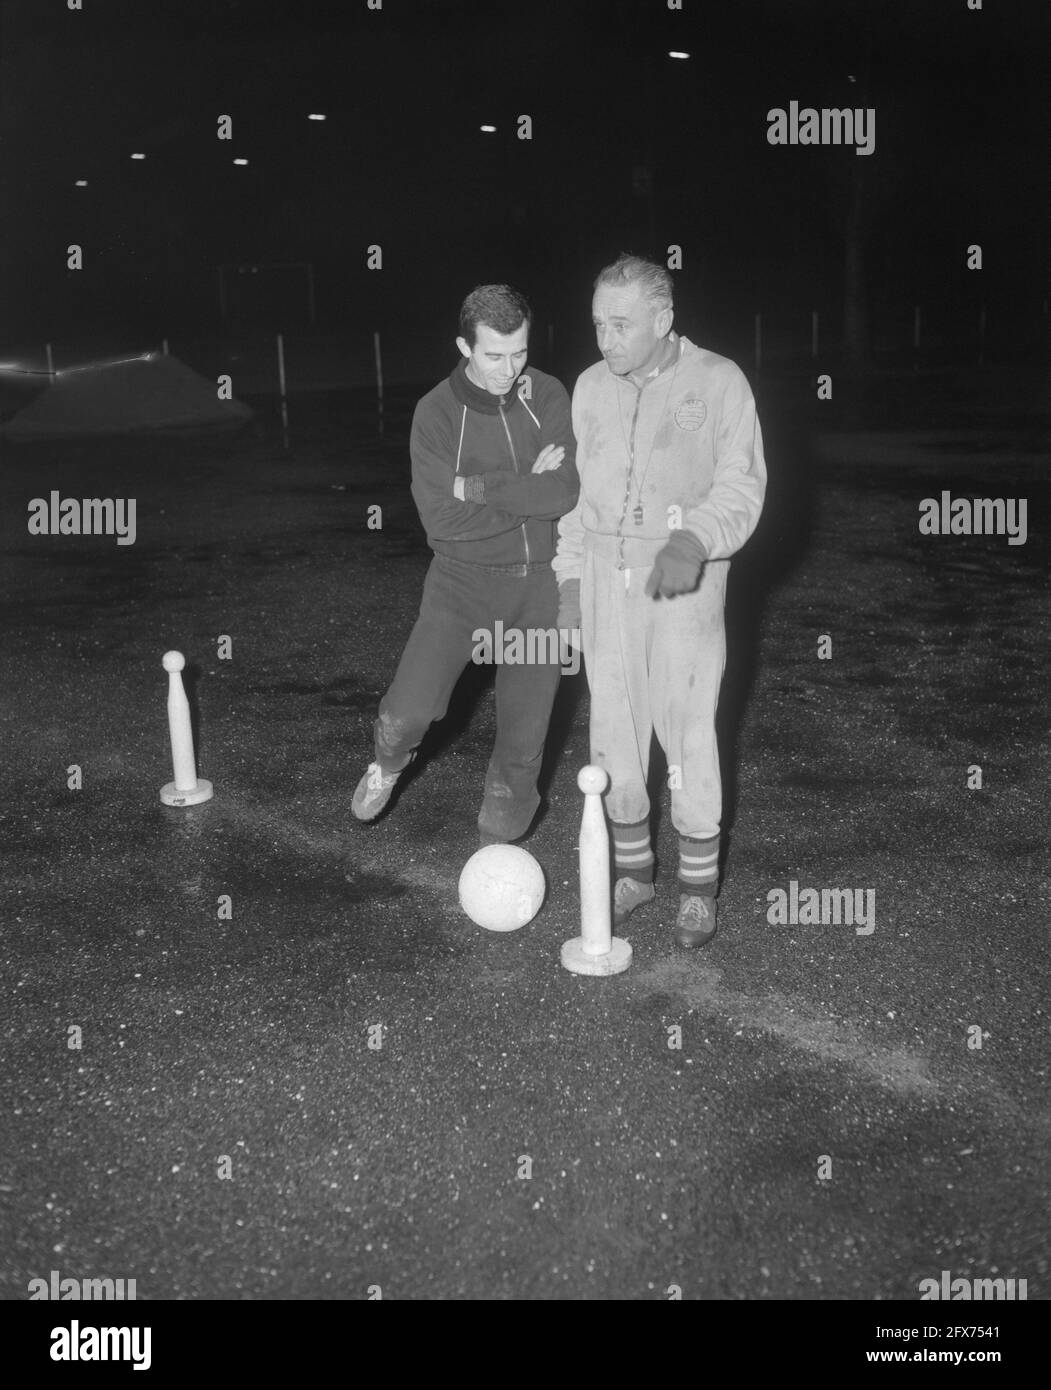 Coen Moulijn with trainer George Sobotka, January 6, 1961, sports, soccer, The Netherlands, 20th century press agency photo, news to remember, documentary, historic photography 1945-1990, visual stories, human history of the Twentieth Century, capturing moments in time Stock Photo